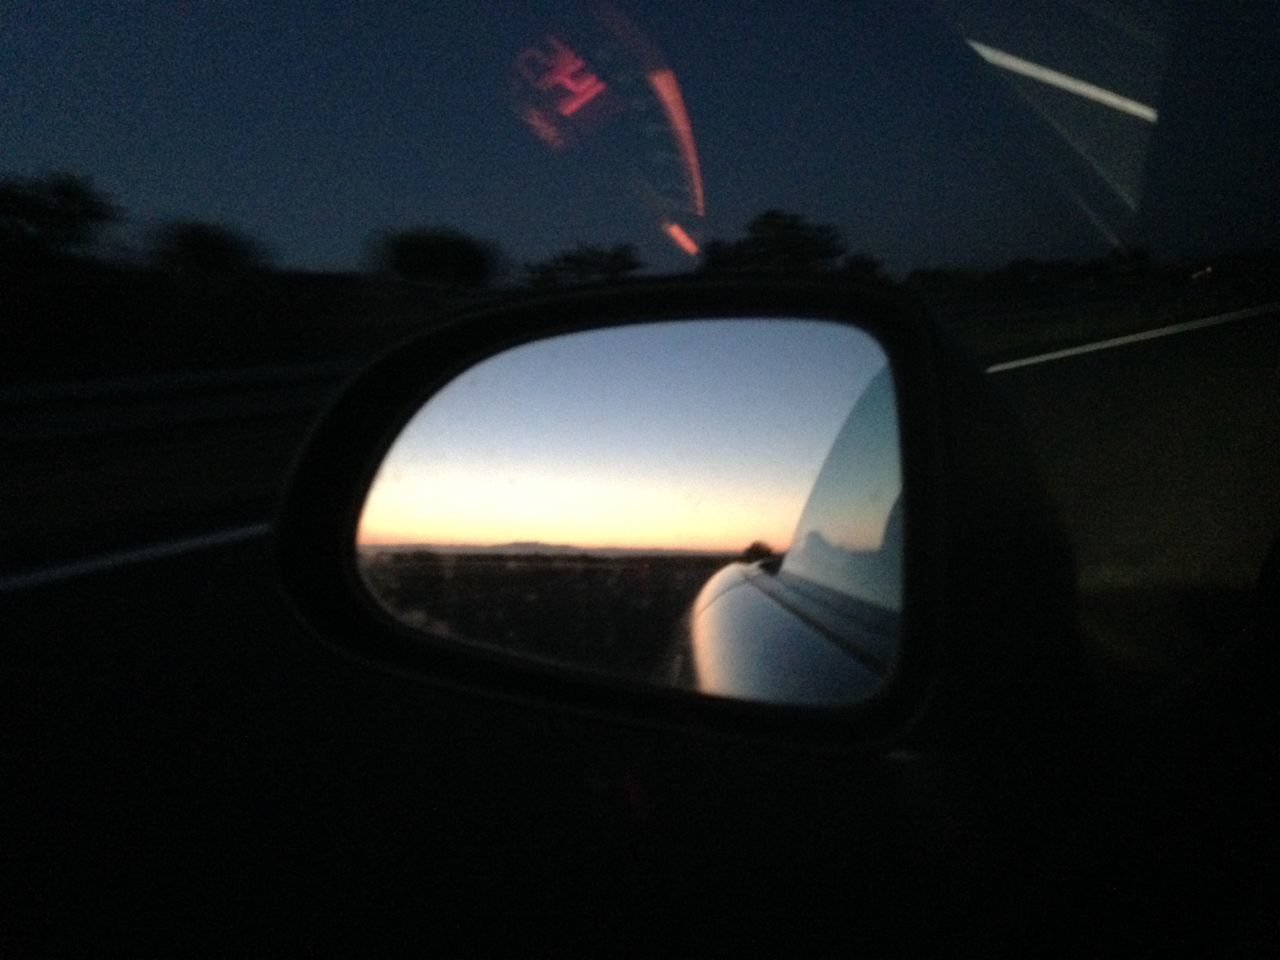 REFLECTION OF SIDE-VIEW MIRROR IN CAR